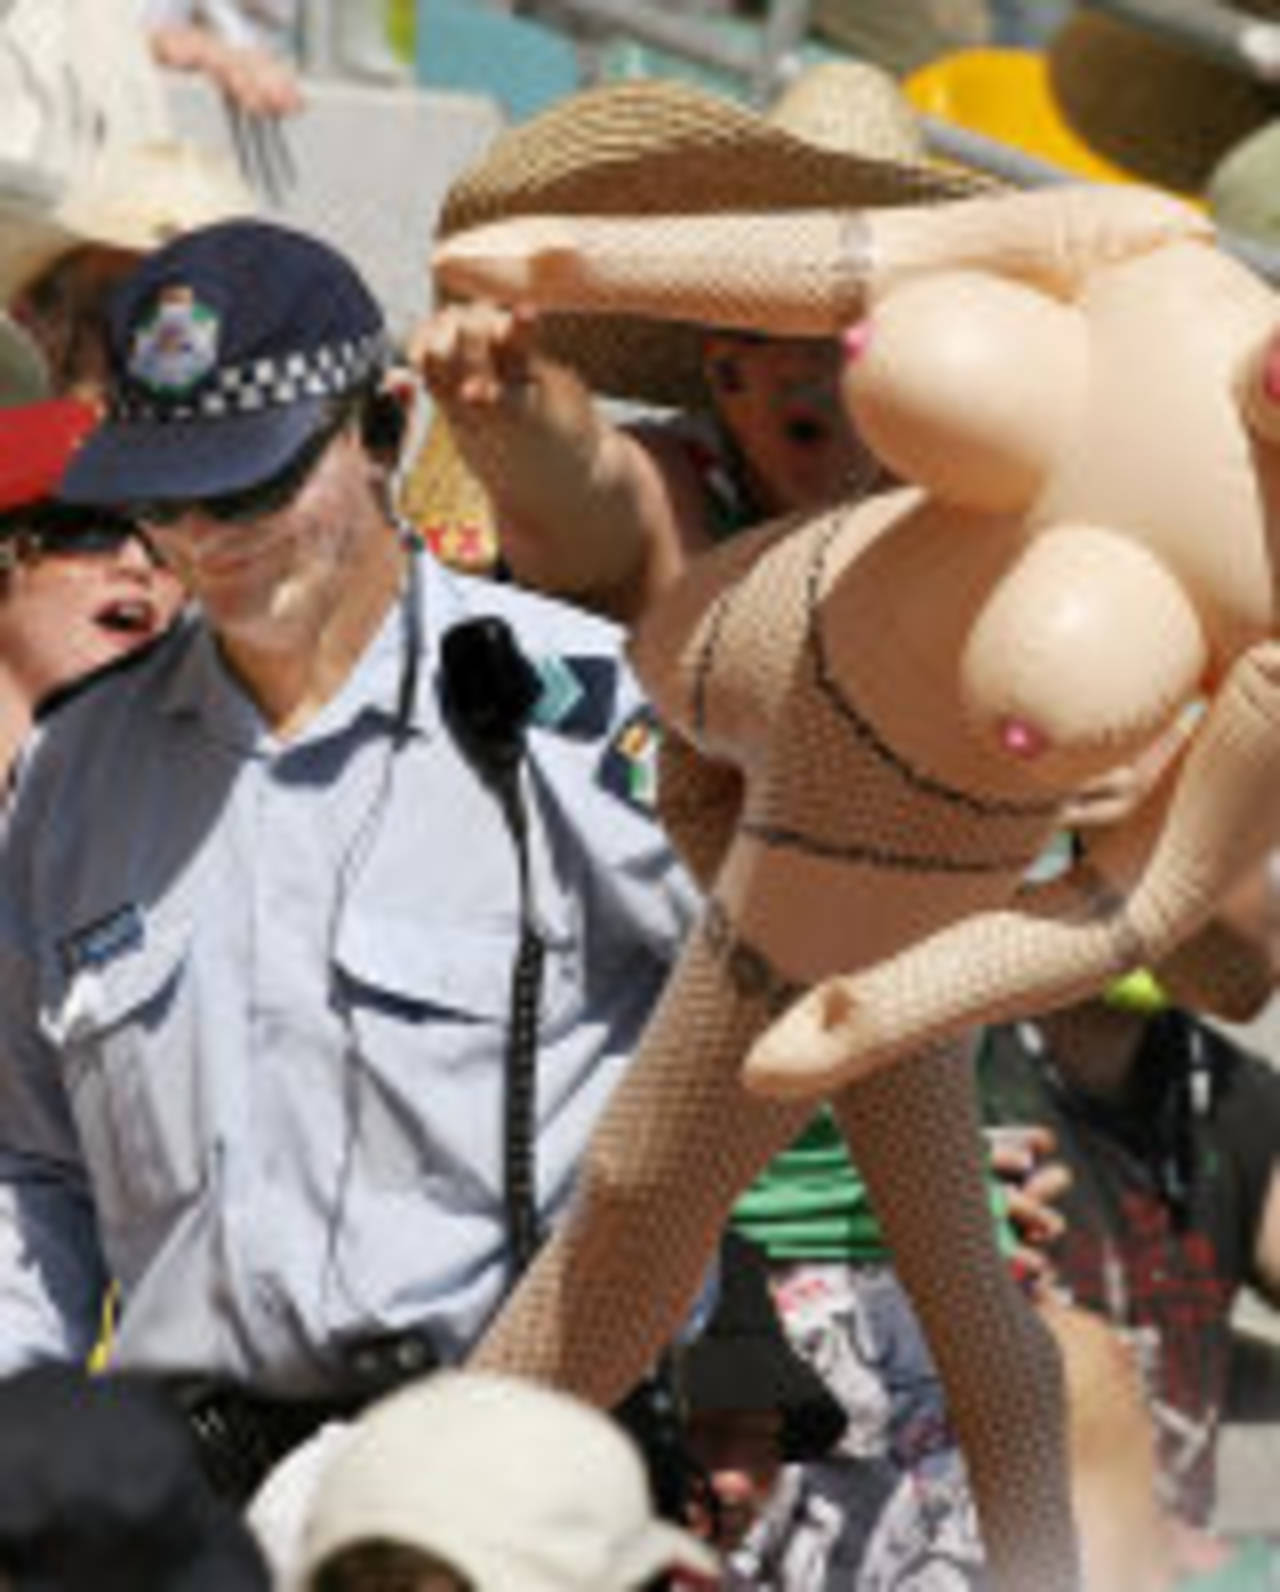 Police remove an inflatable doll from the crowd, Australia v England, 1st Test, Brisbane, November 25, 2006